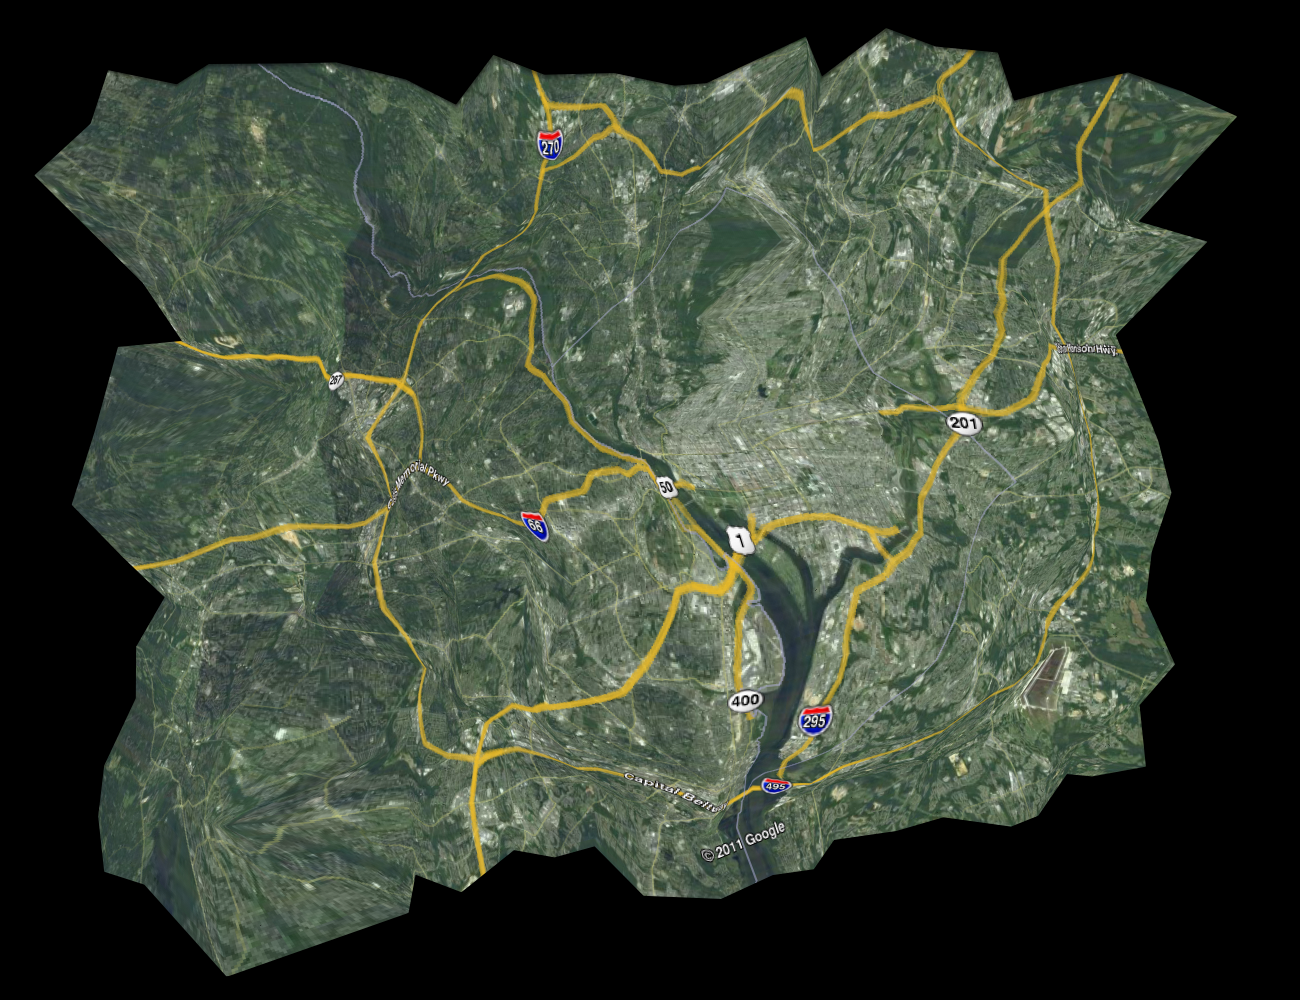 The transformed map